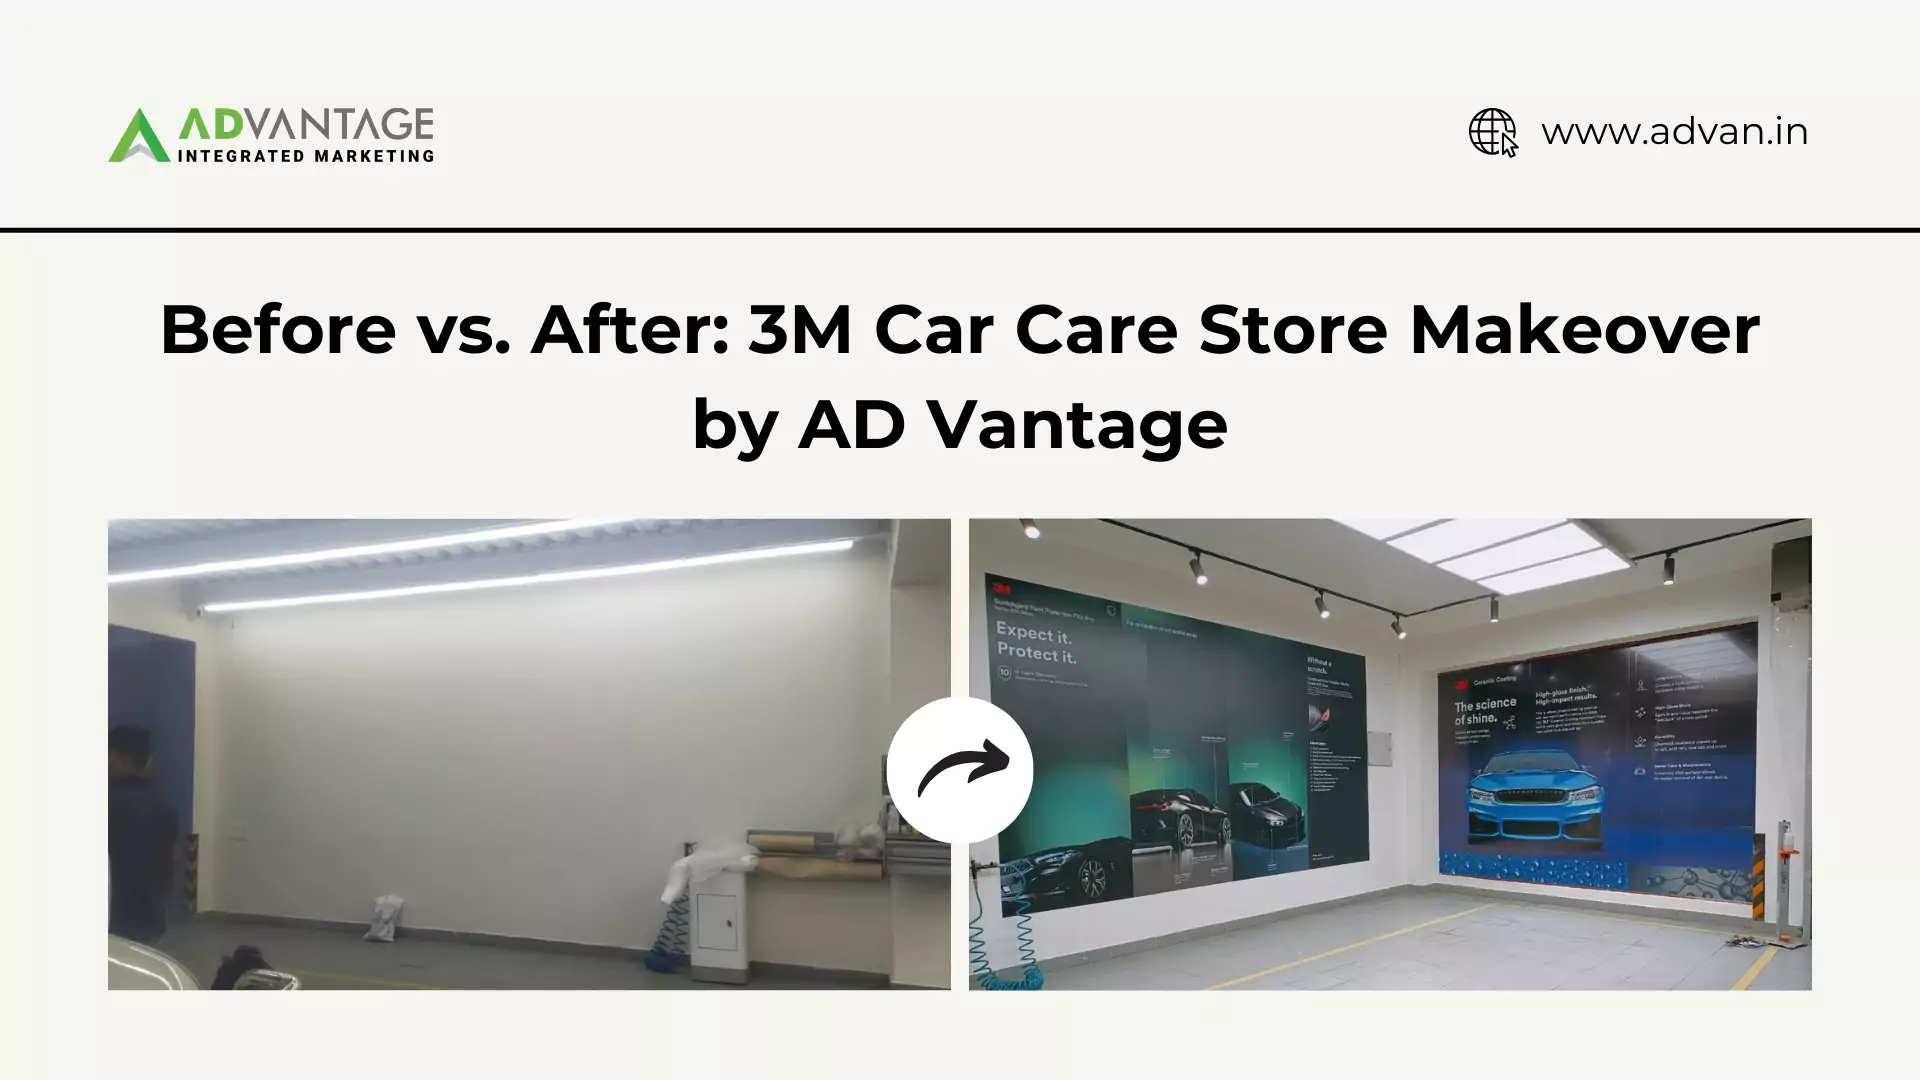 inshop-branding-for-3m-car-care-by-ad-vantage